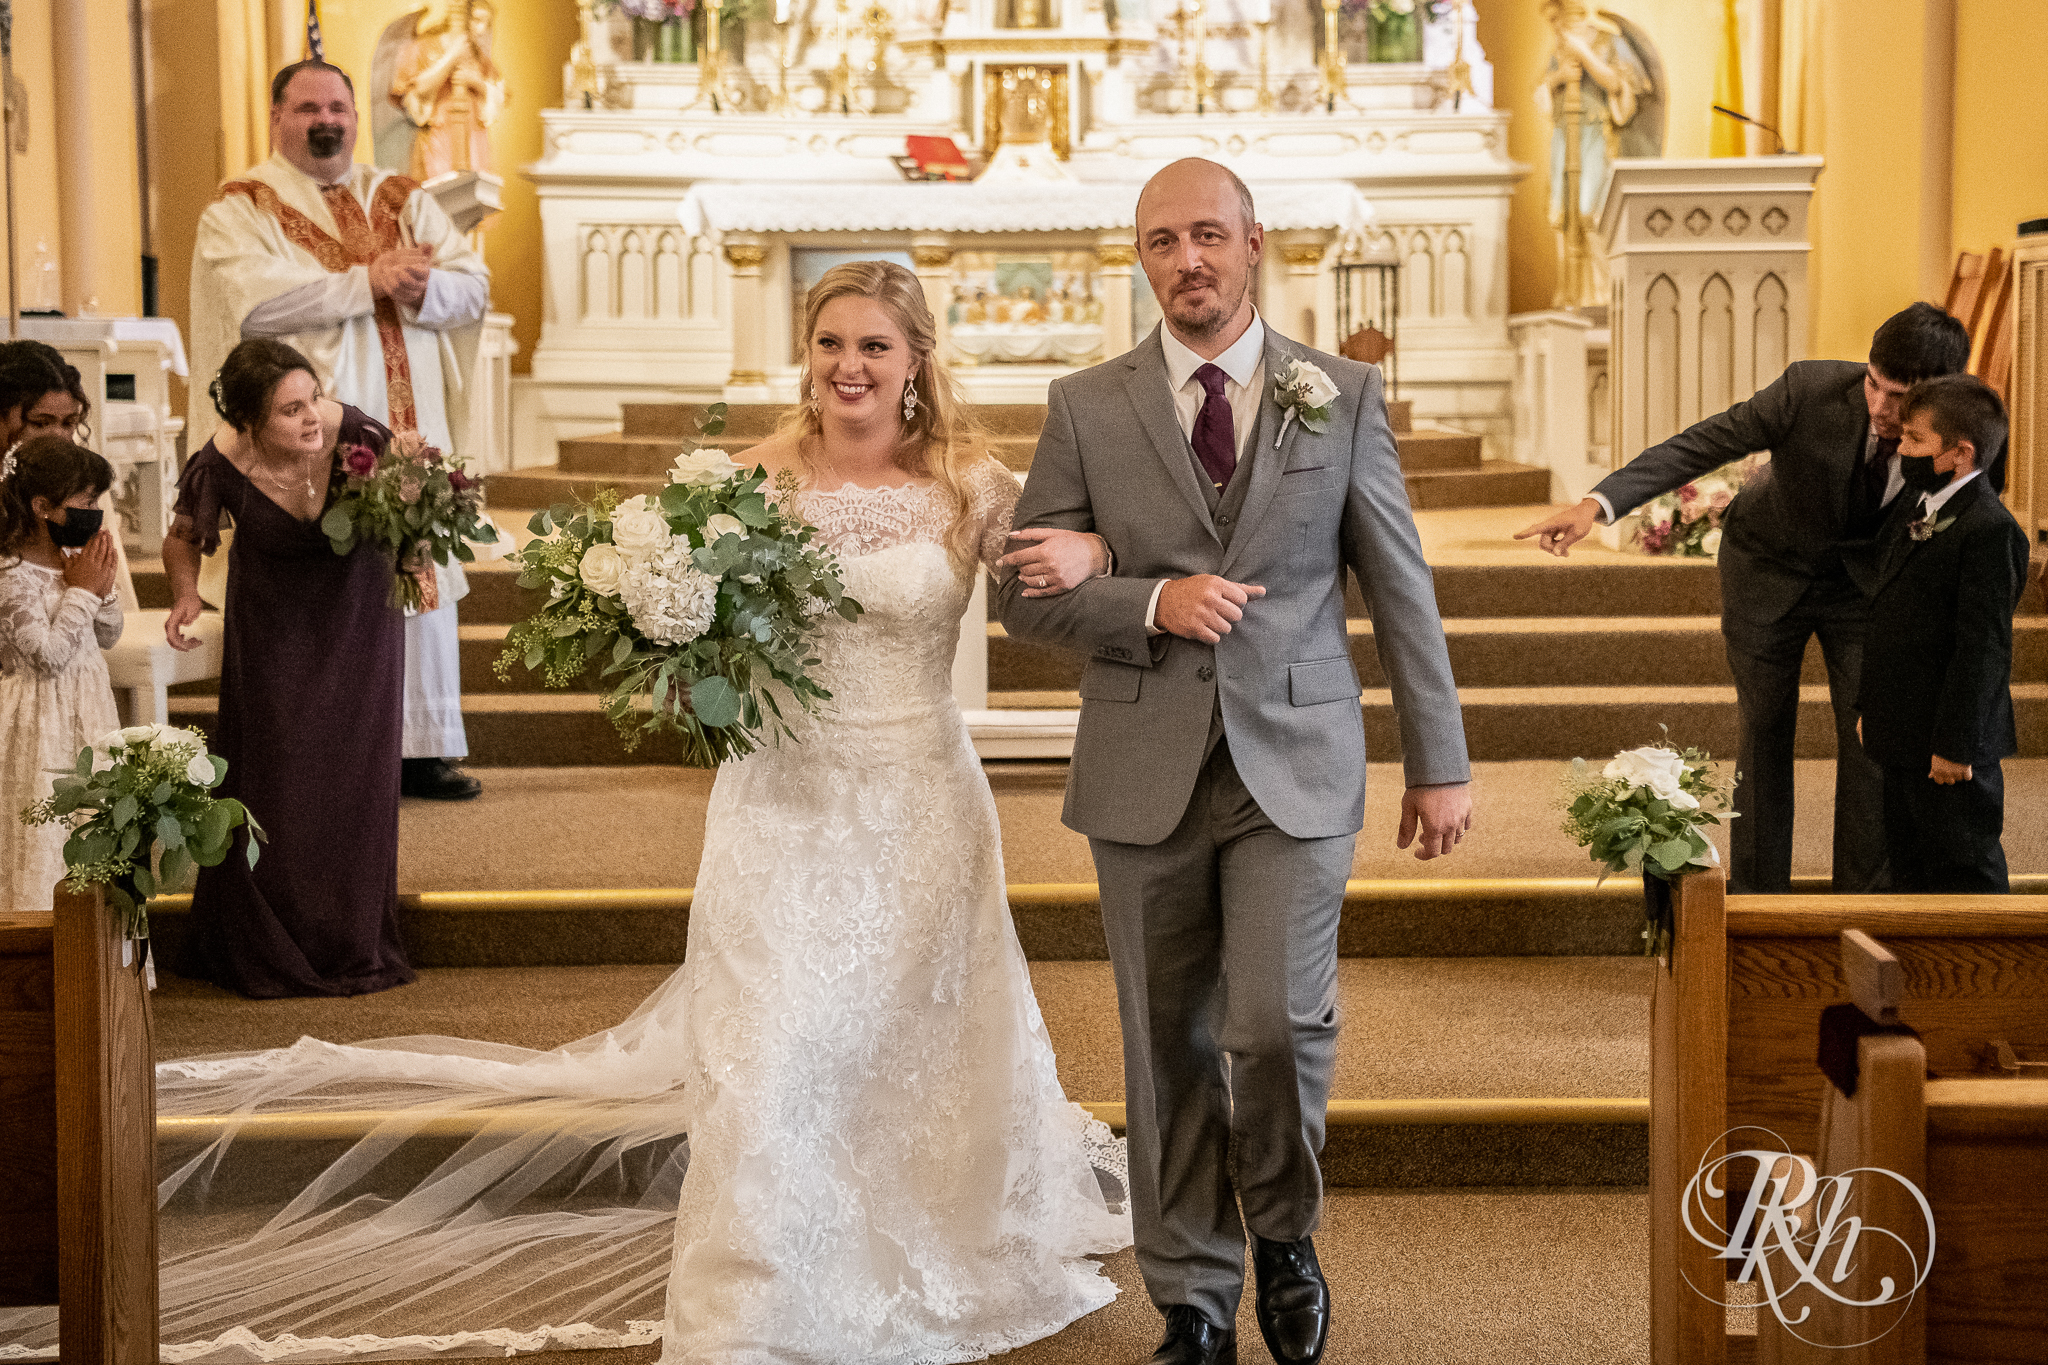 Bride and groom walk down the aisle after ceremony at church wedding in New Prague, Minnesota.